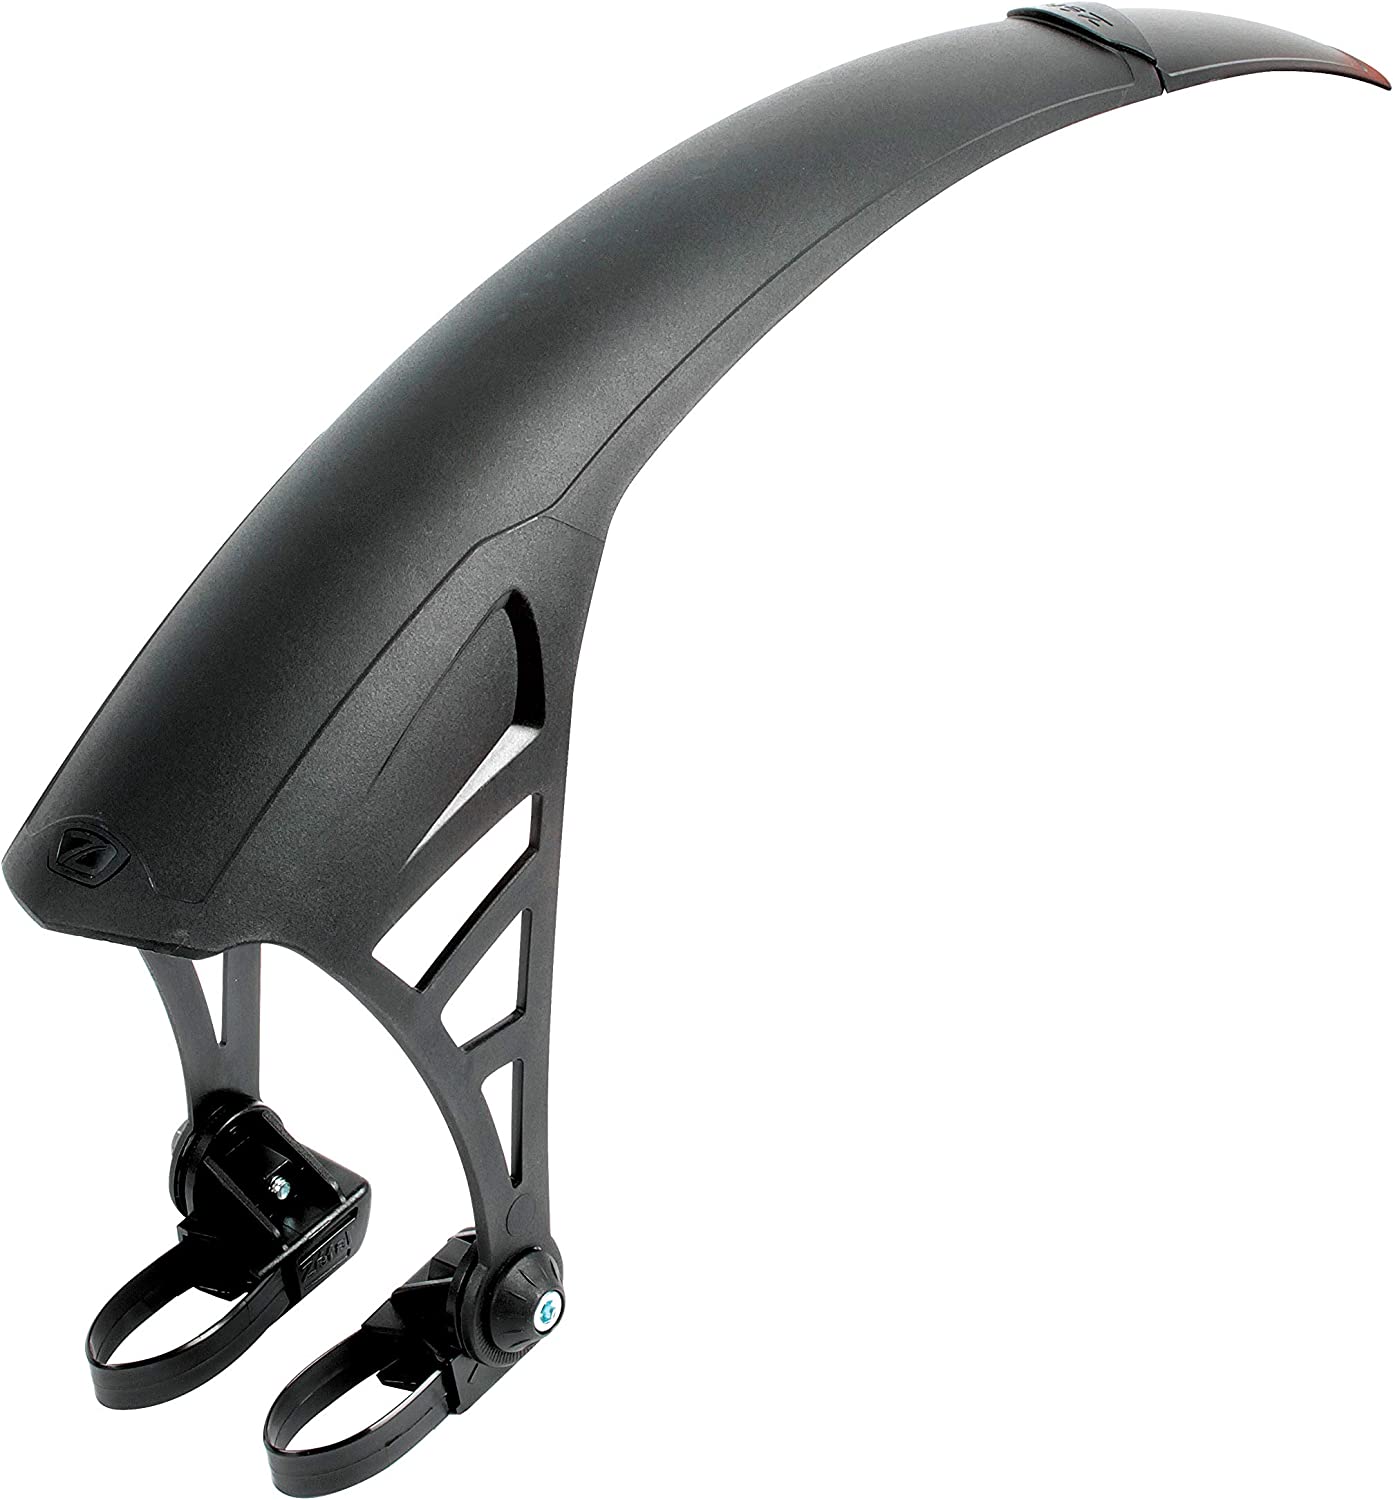 Zefal-No-Mud-Universal-Front-or-Rear-Mudguard-for-26-inch-Wheels